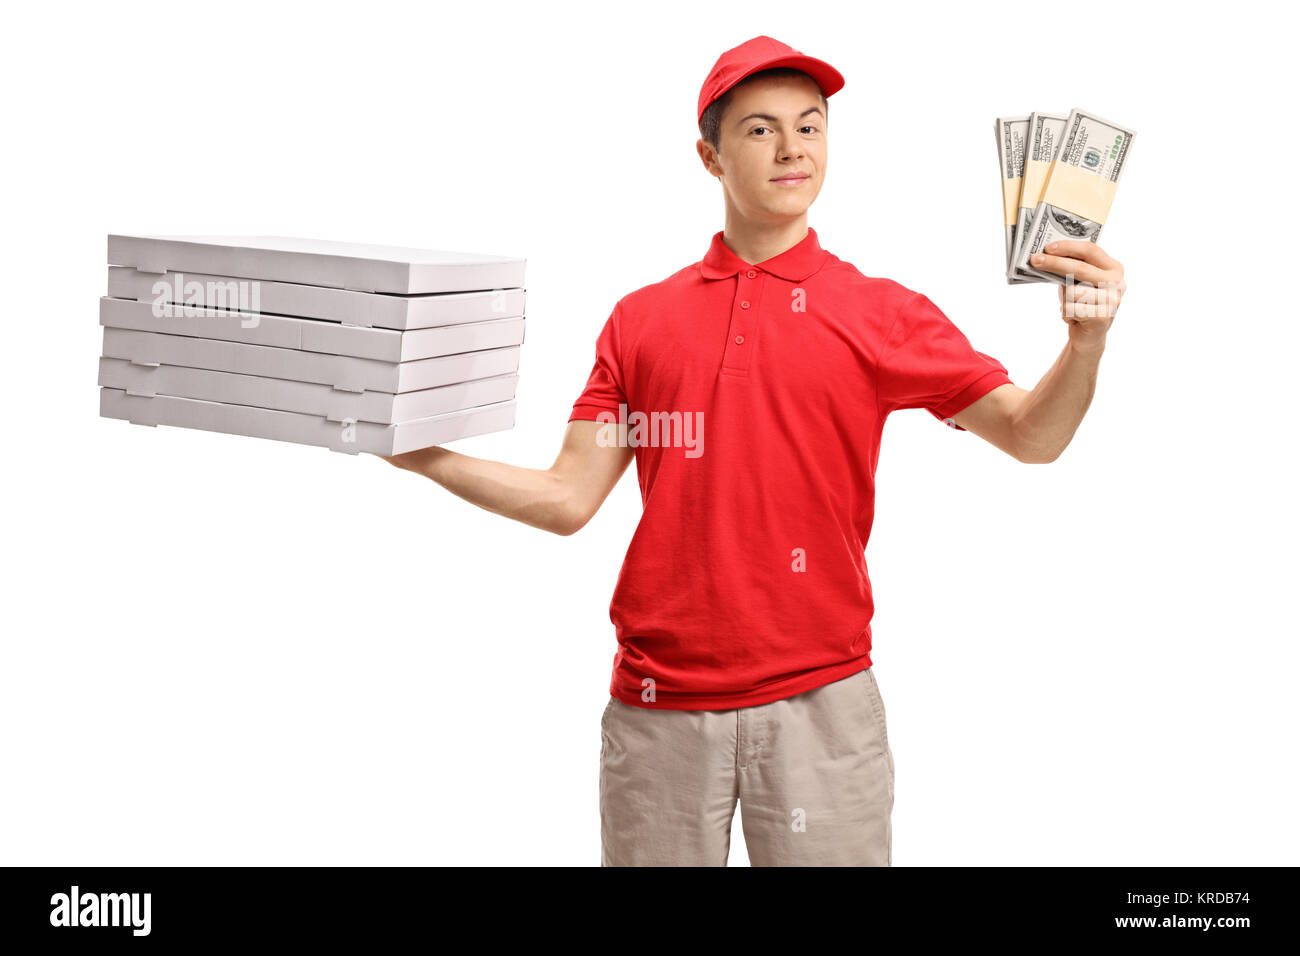 Teenage pizza delivery boy holding a stack of pizza boxes and bundles of money isolated on white background Stock Photo